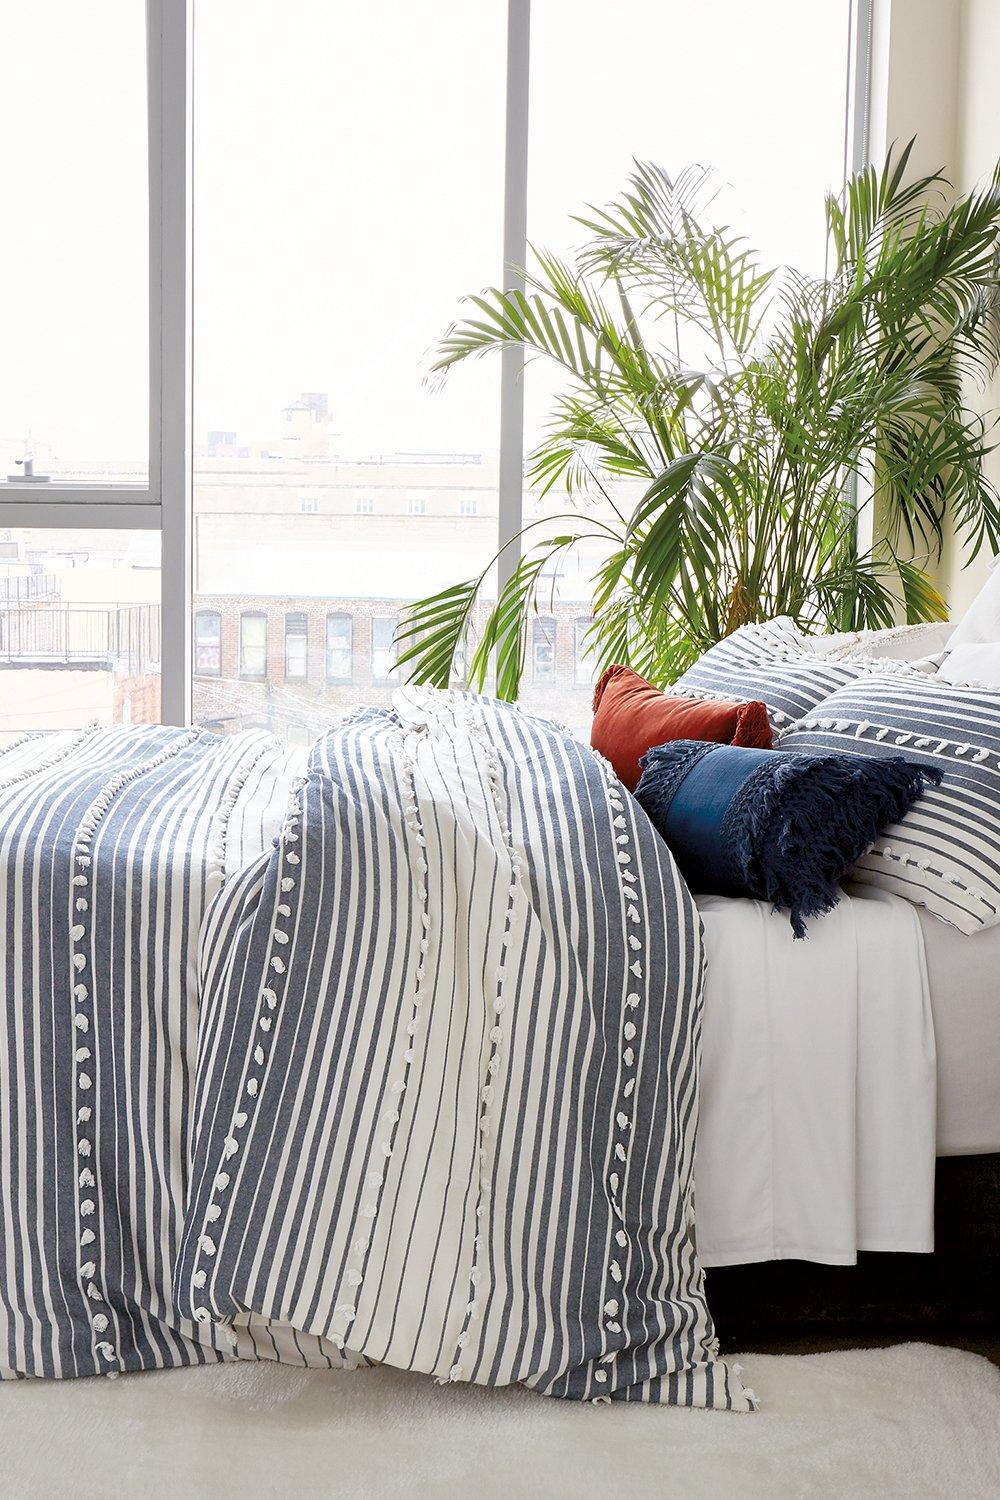 'Yarn Dyed Tufted Stripe' Cotton Duvet Cover